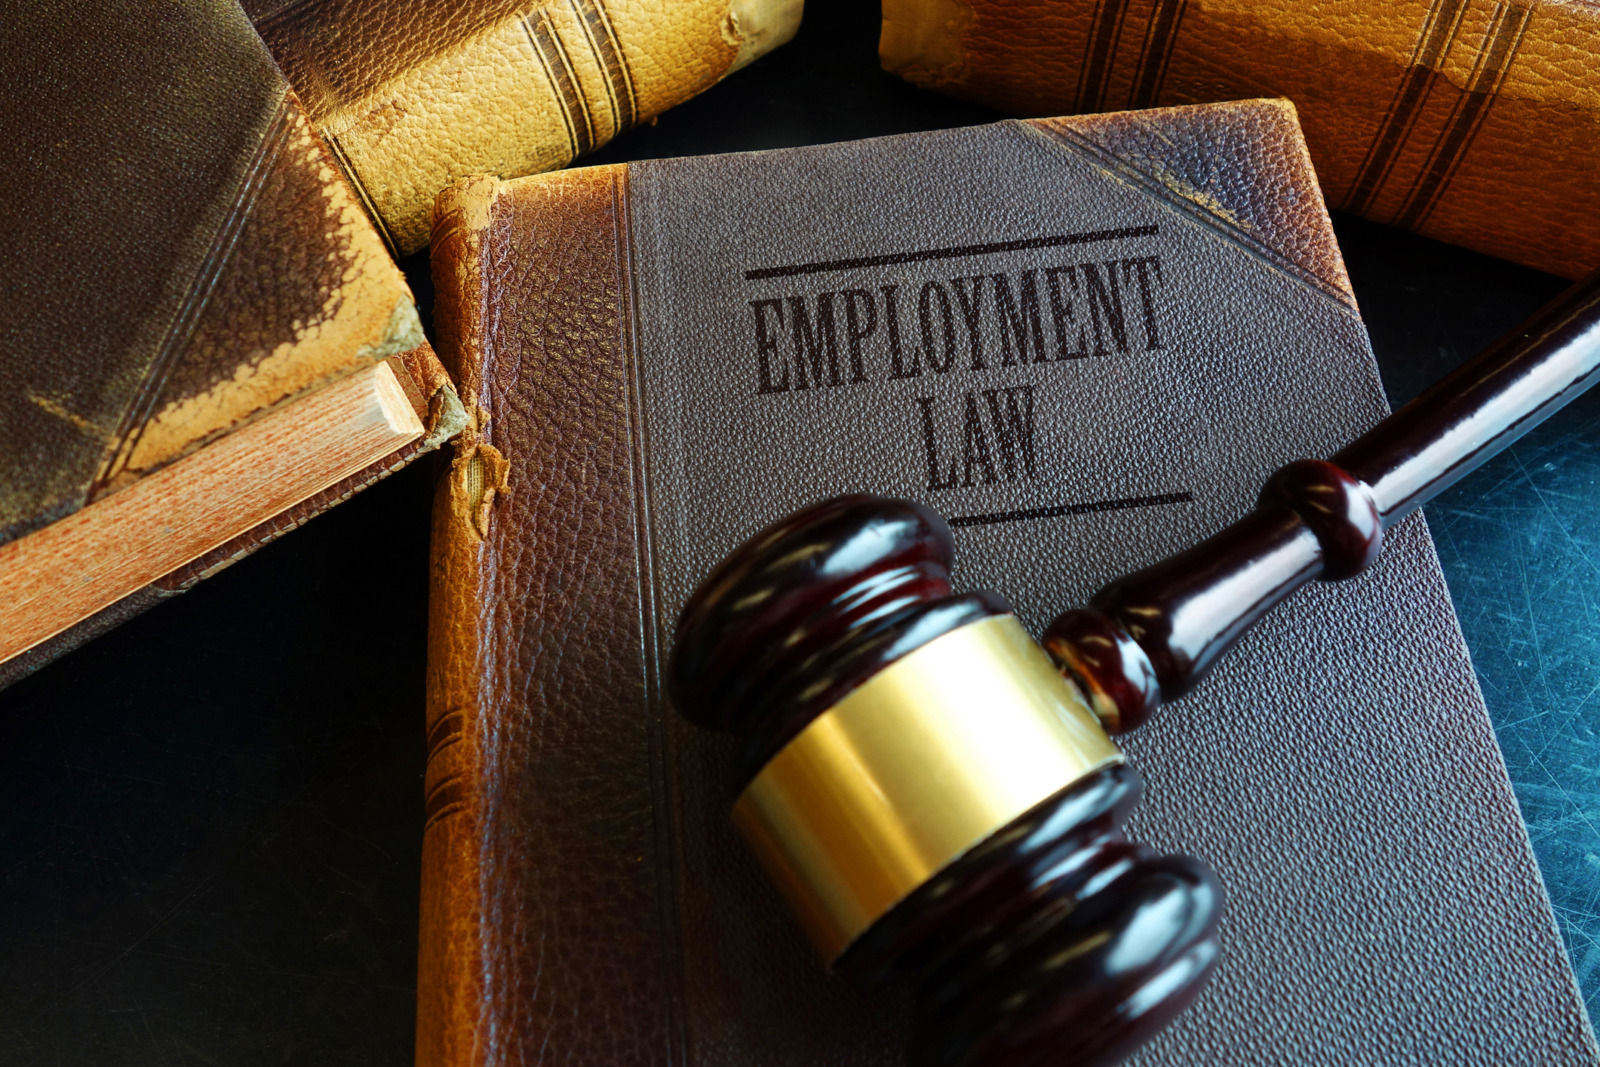 5 Ways Hiring Software Helps You Comply With the EEOC